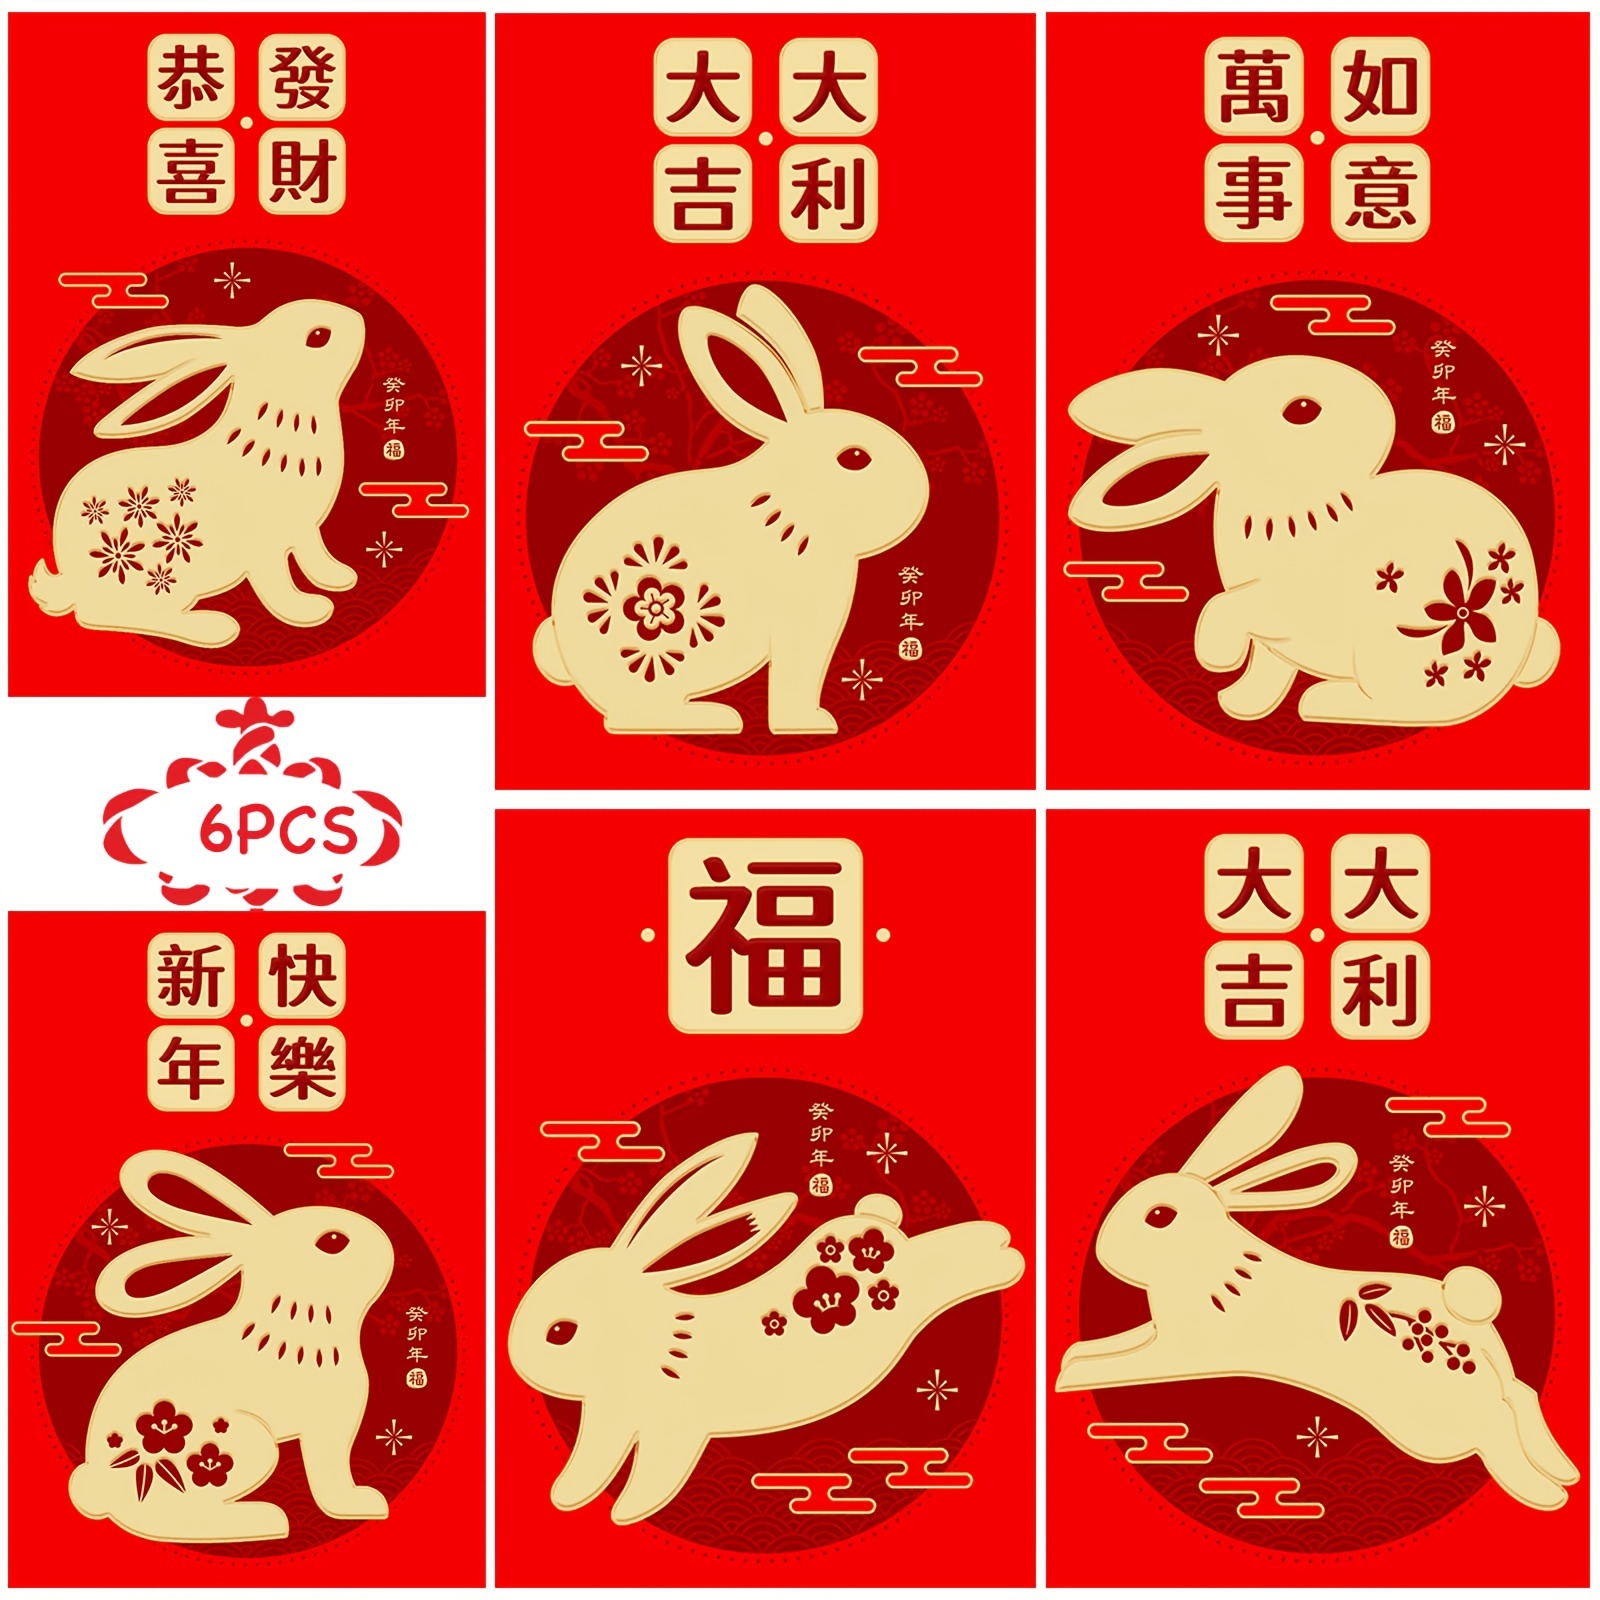 Lunar New Year: Year of the Rabbit Red Envelope